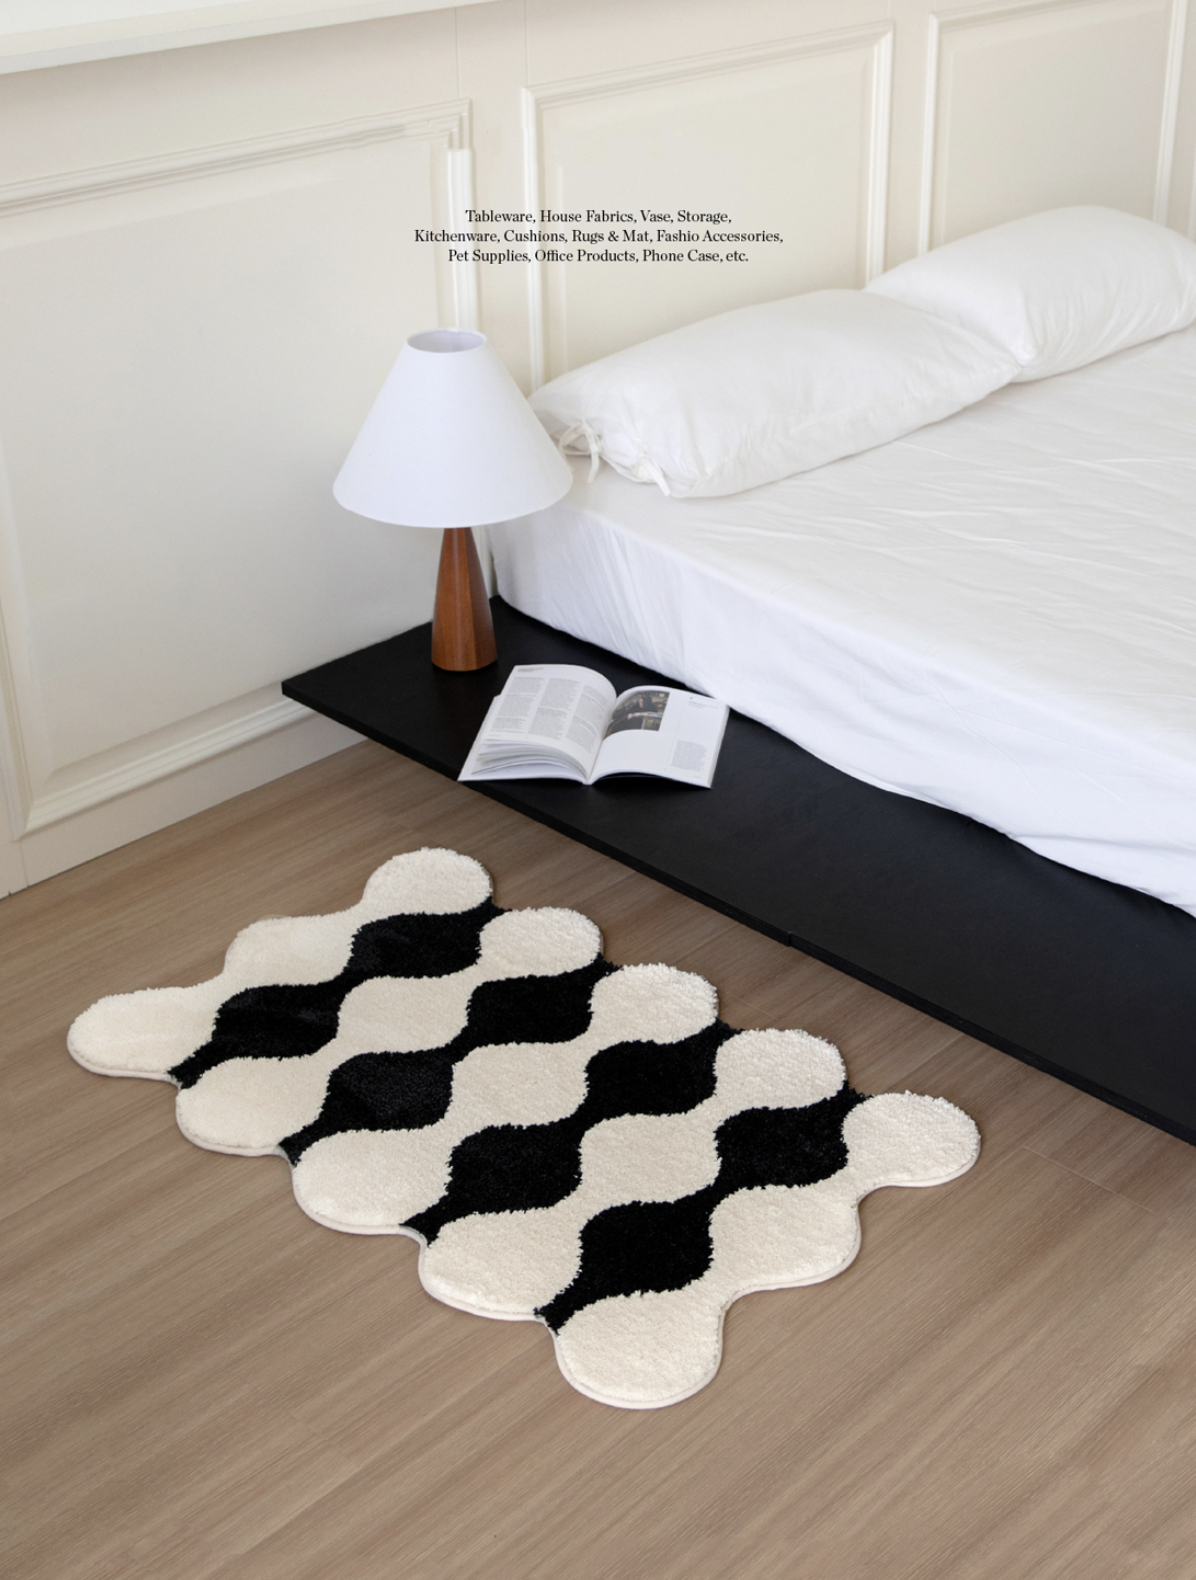 Nordic simple style cream and ivory color tone black and white tufted rug series, by A Bit Sleepy homedecor concept store